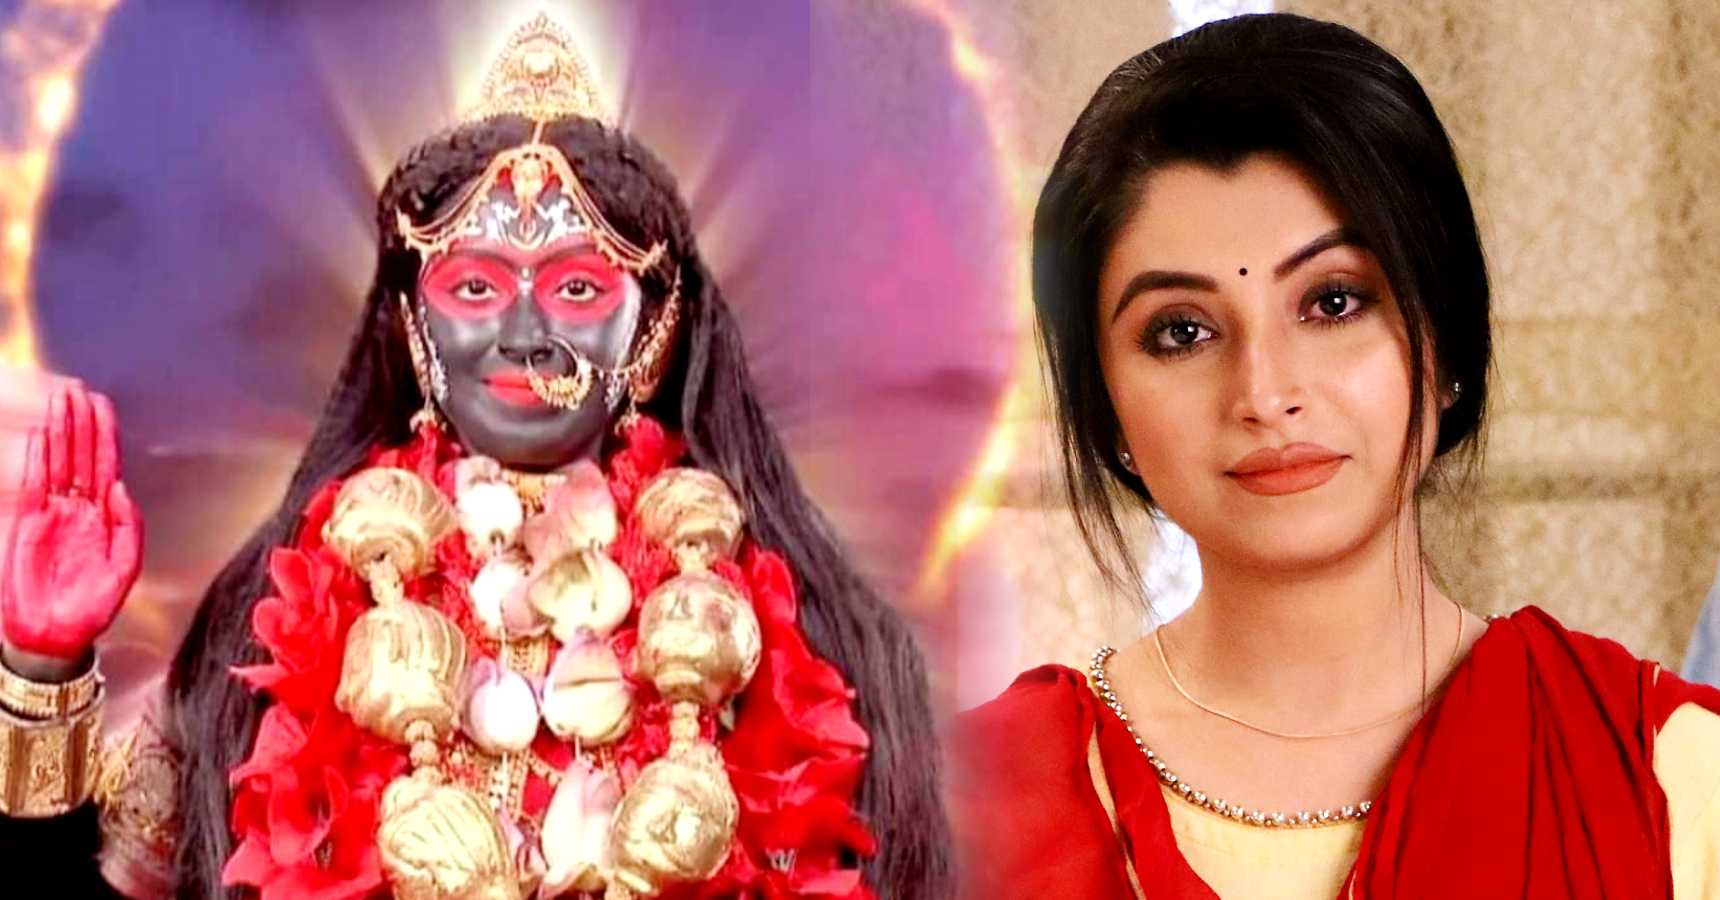 Tv actresses of bengali serial who plays Maa Kali's role on telivision